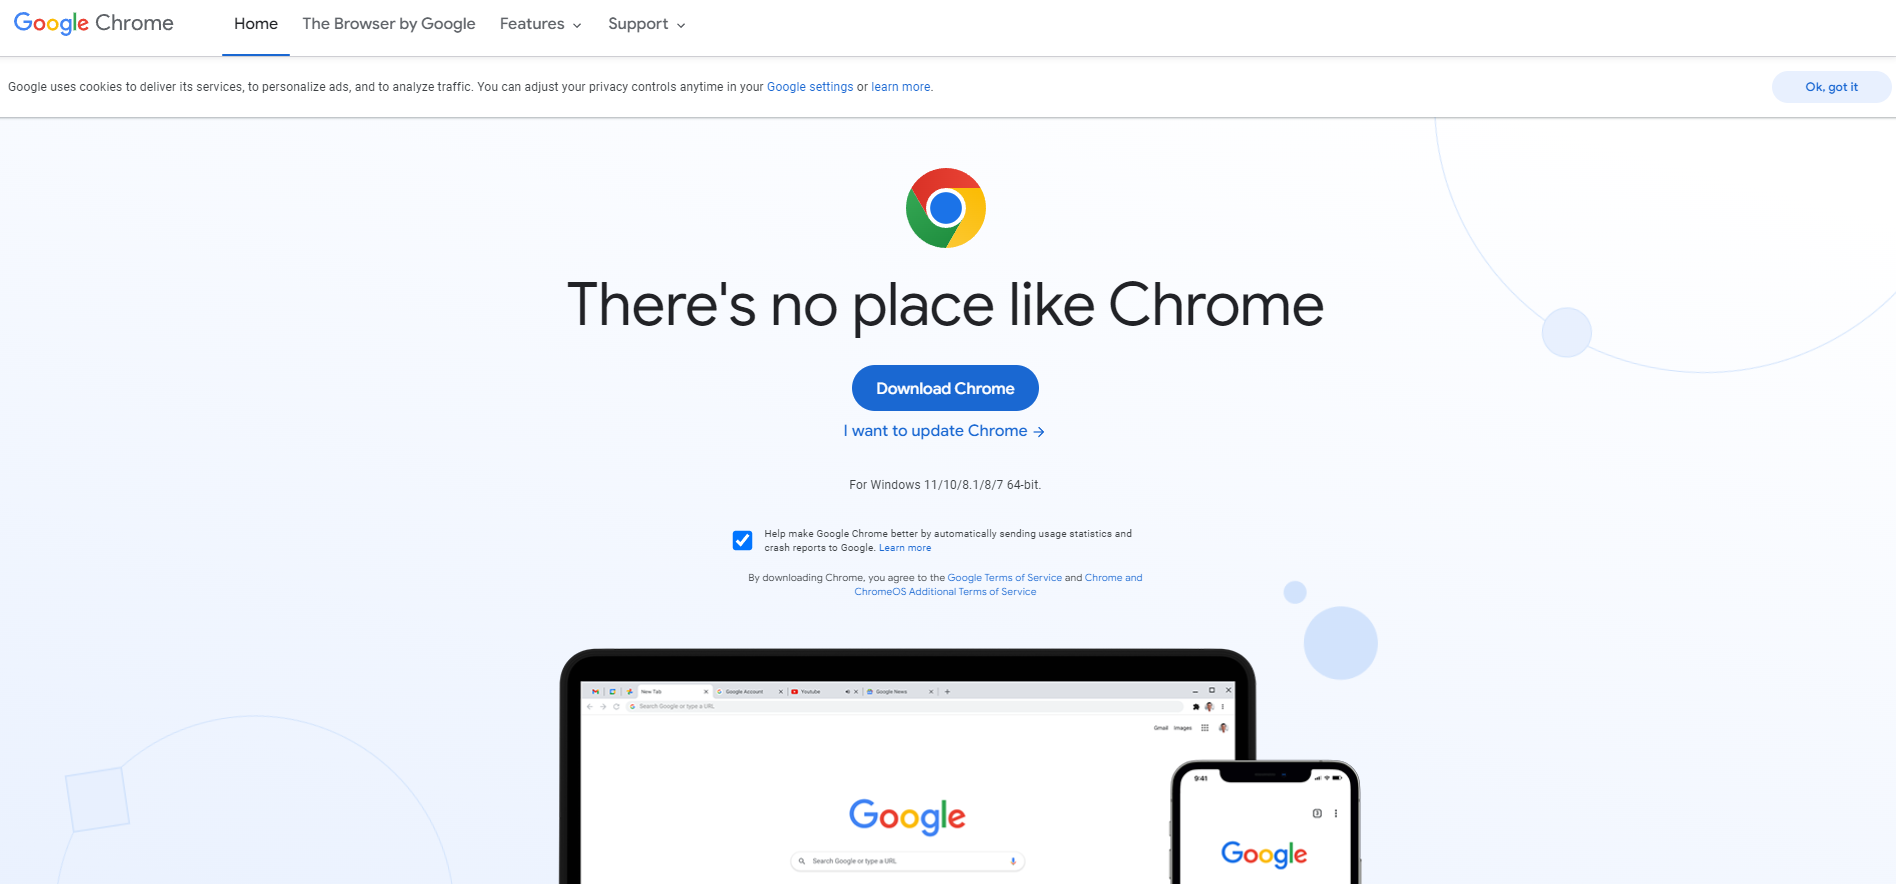 Google Chrome download page